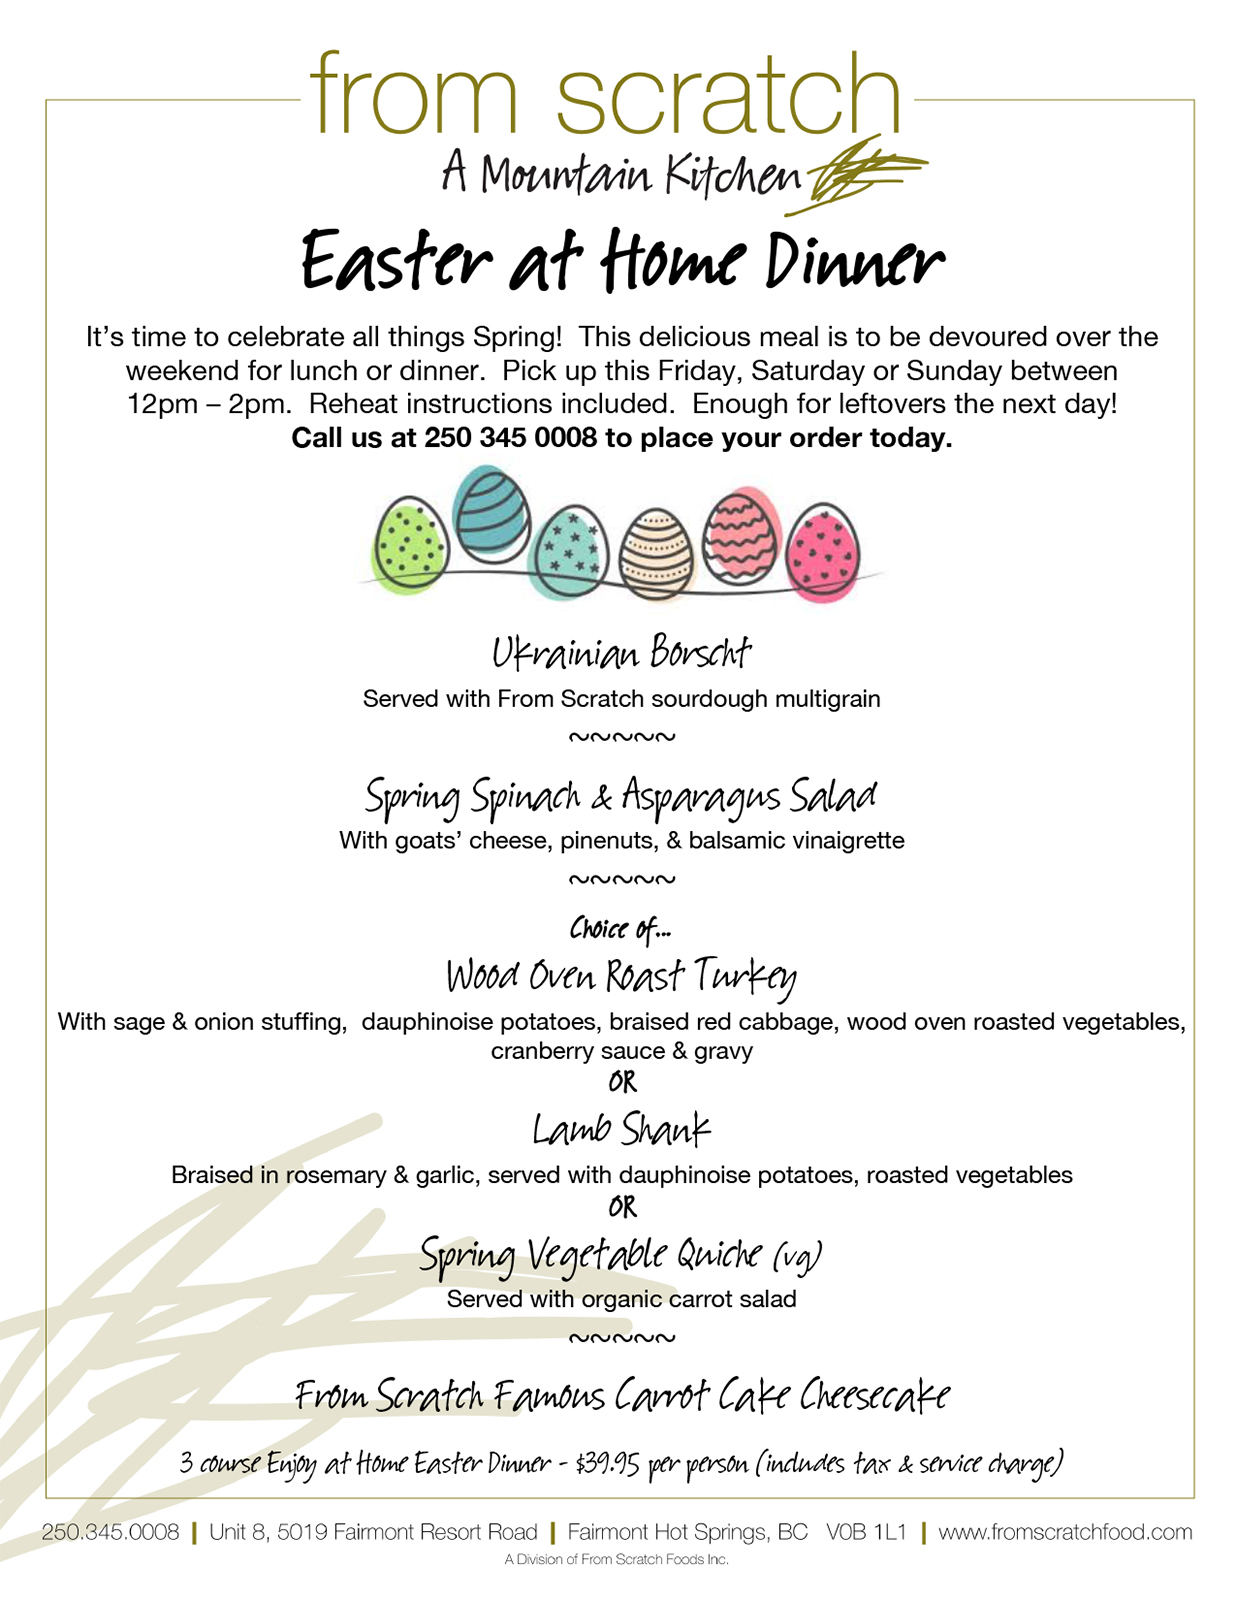 From Scratch Food Easter Supper at home menu